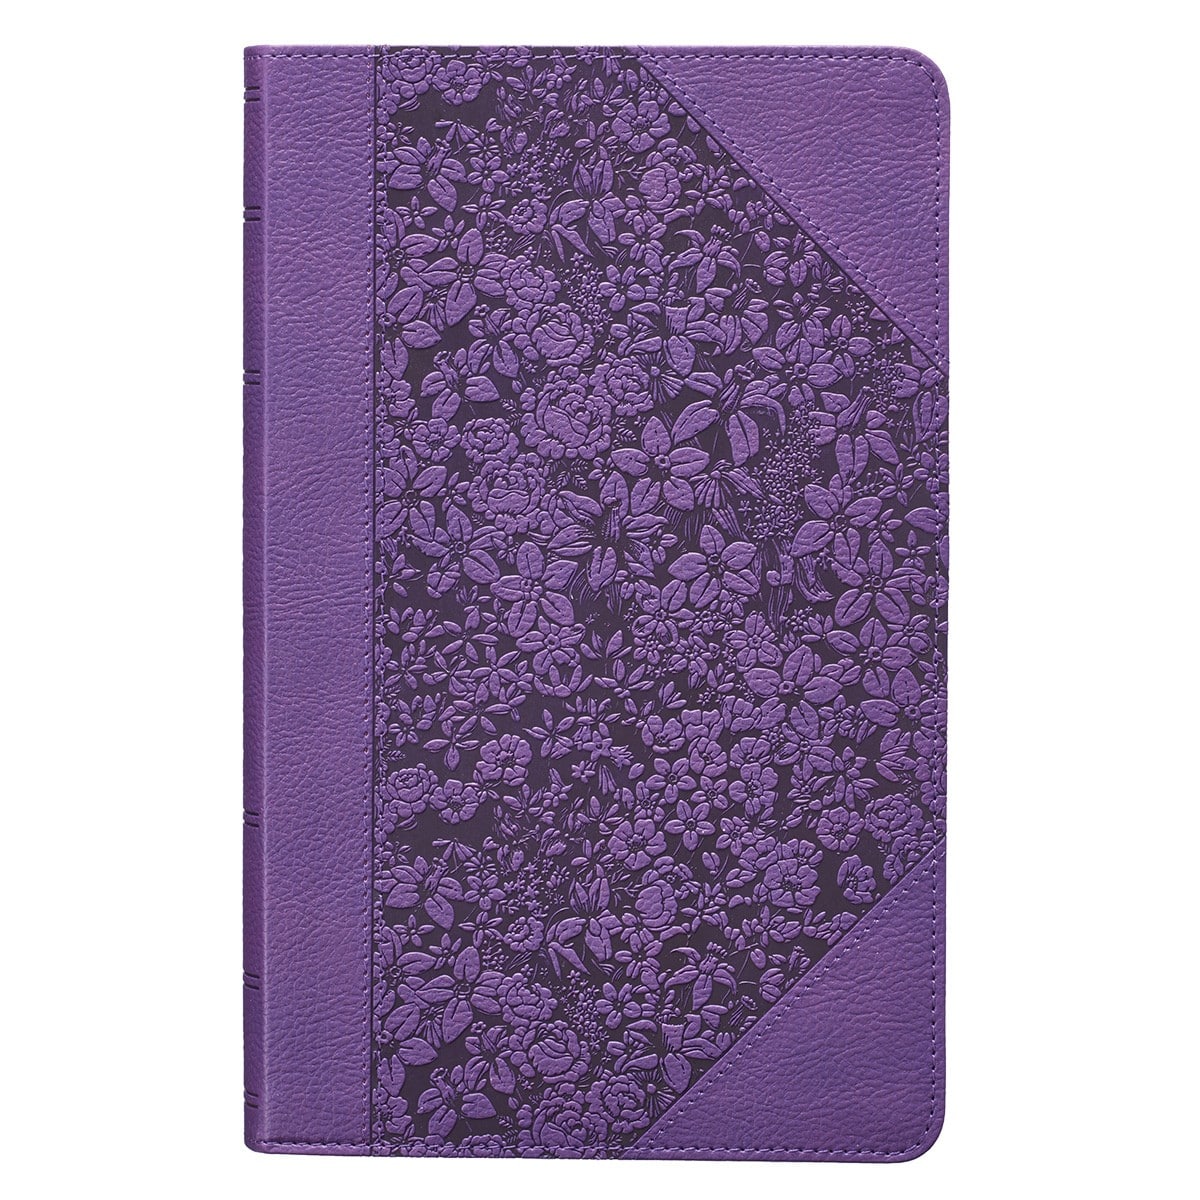 Two-tone Purple Floral Faux Leather Giant Print Standard-size King